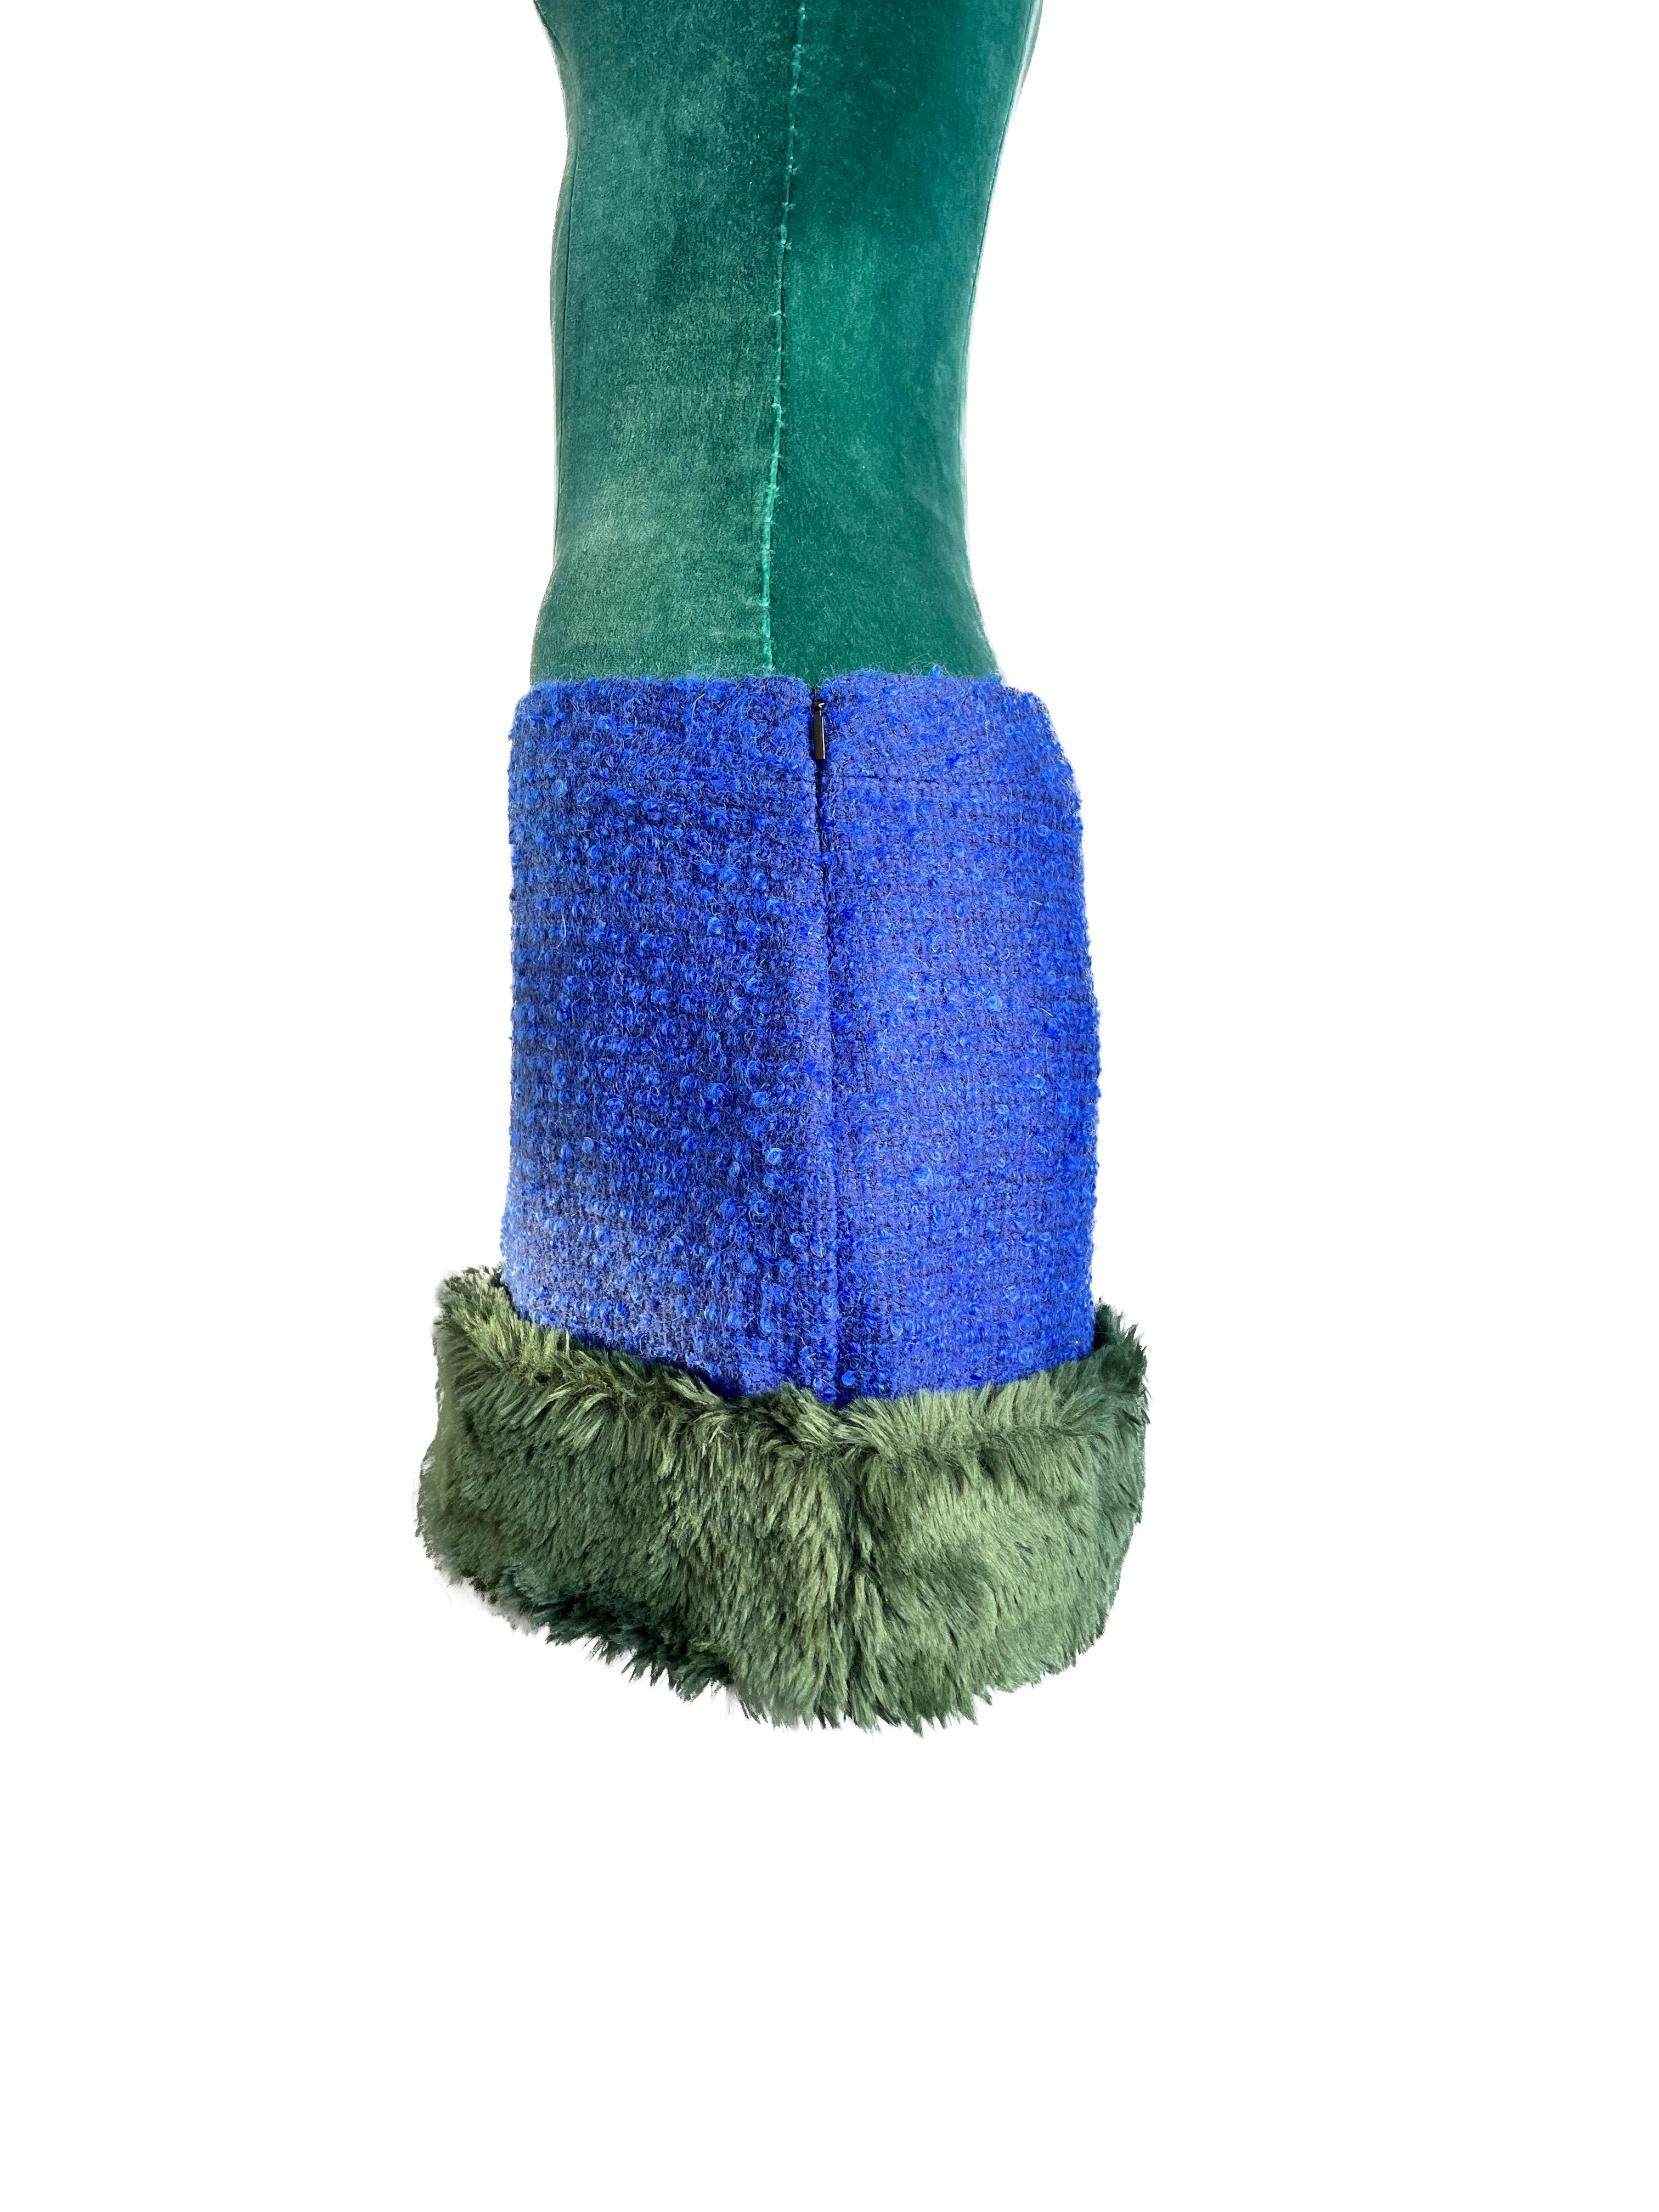 Saint Laurent's 2021 runway collection showcased a daring fusion of edgy street style and luxurious materials, and one standout piece that epitomized this bold aesthetic was the blue tweed mini skirt with vibrant green faux fur trim. This